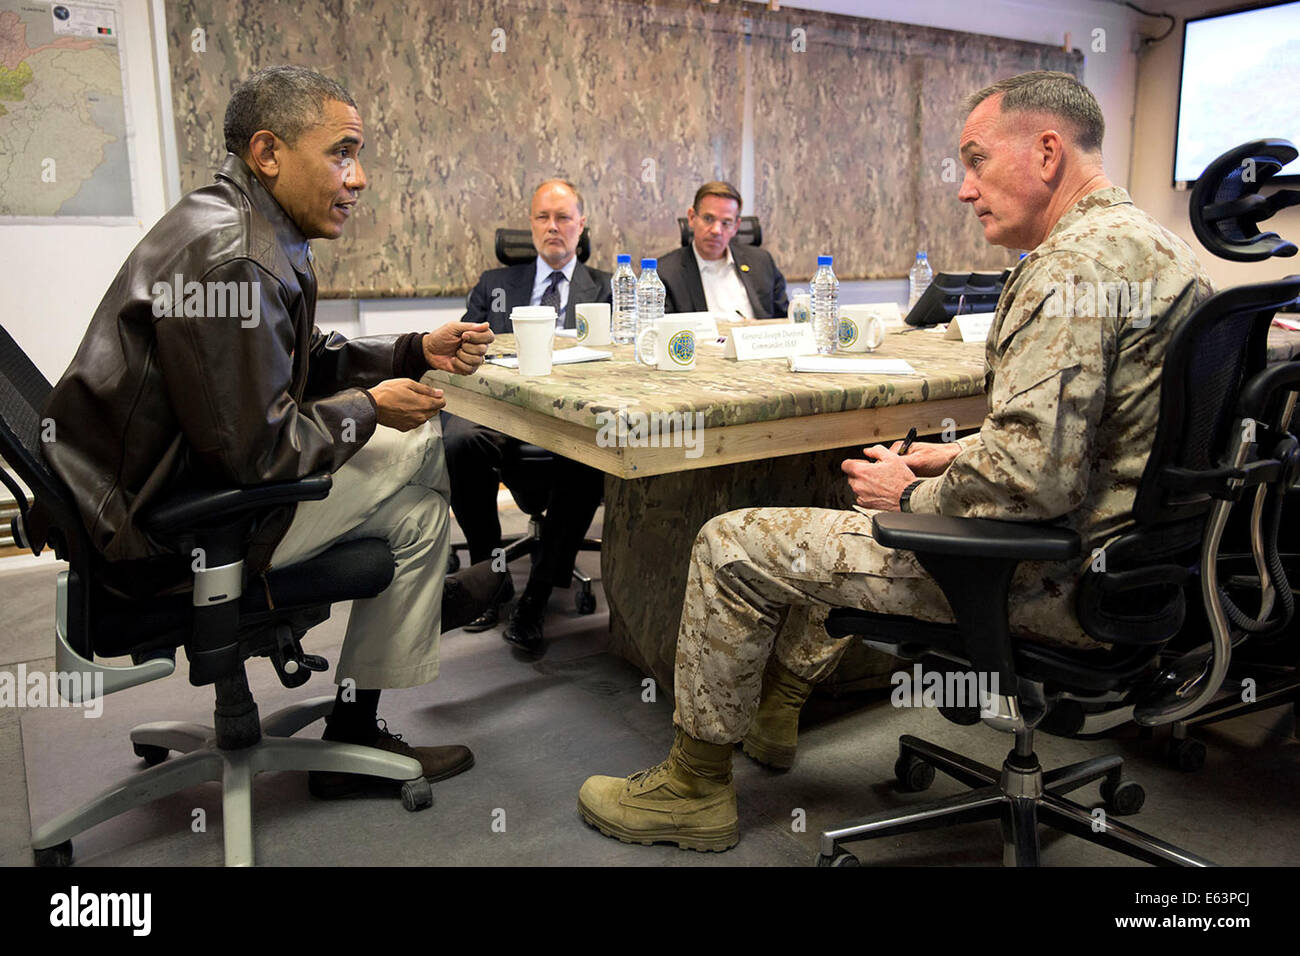 President Barack Obama receives a briefing from Gen. Joseph F. Dunford, Jr., Commander of International Security Assistance Force and United States Forces-Afghanistan, at Bagram Airfield, Afghanistan, Sunday, May 25, 2014. Seated across the table from lef Stock Photo